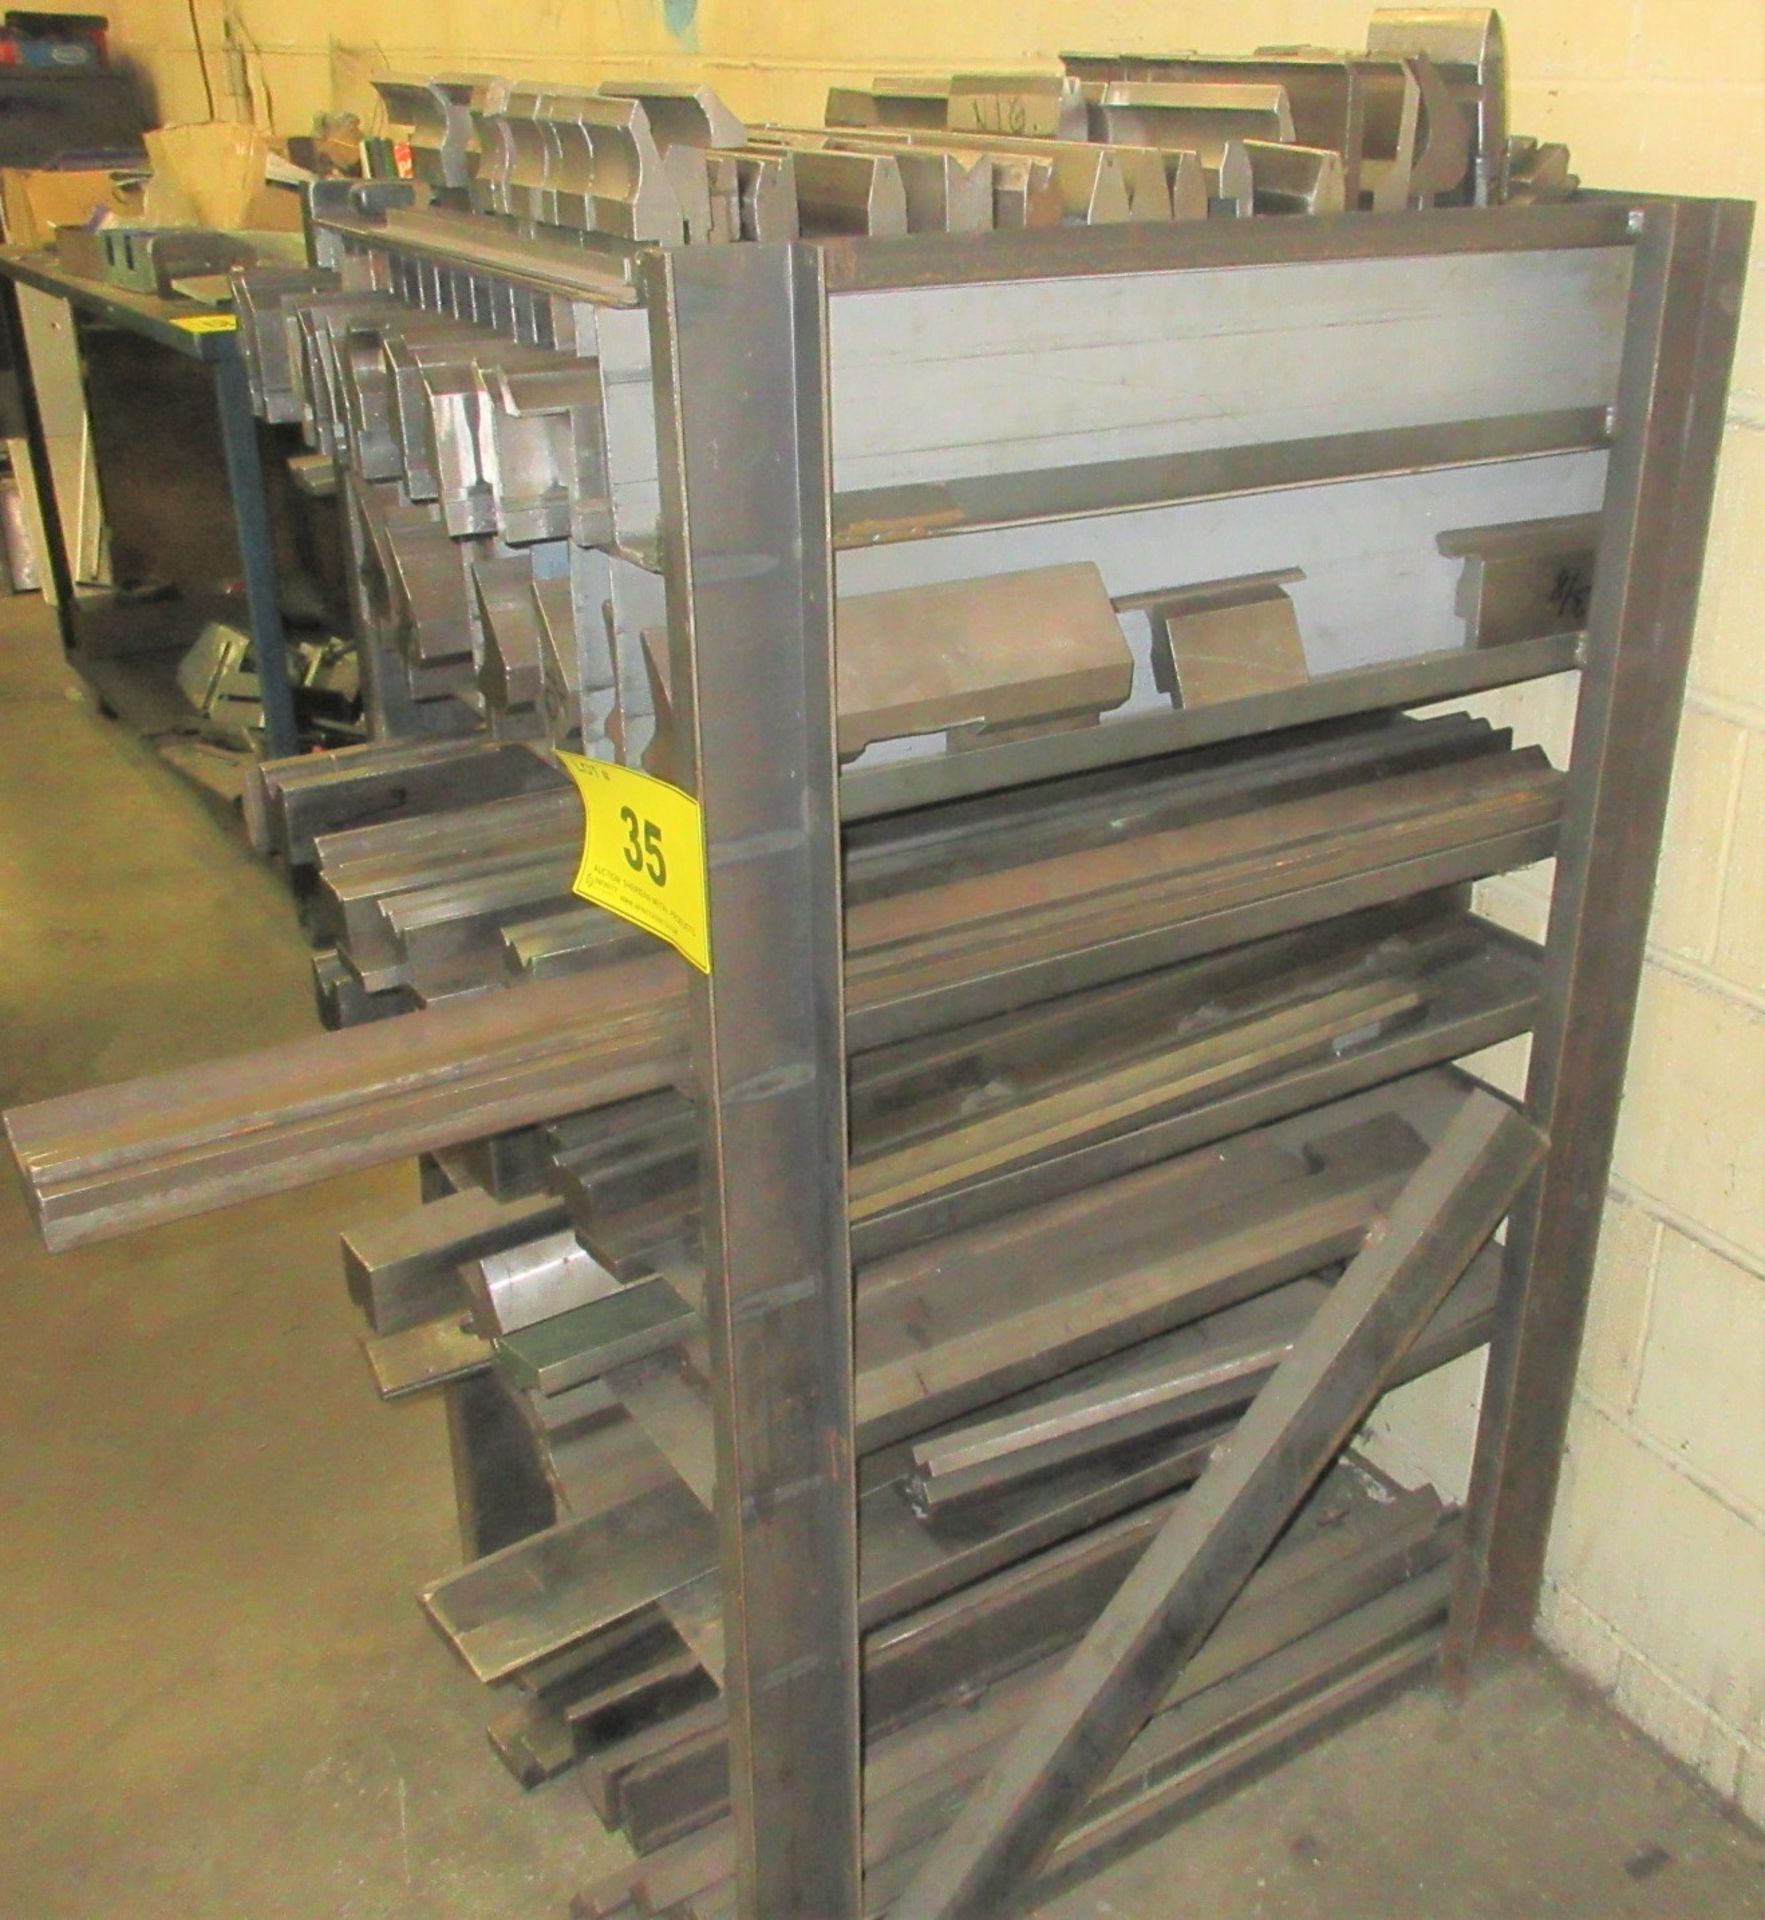 QTY. OF ASST. PRESS BRAKE DIES UP TO 45"L ON 8-LEVEL HEAVY DUTY STORAGE RACK - Image 6 of 6